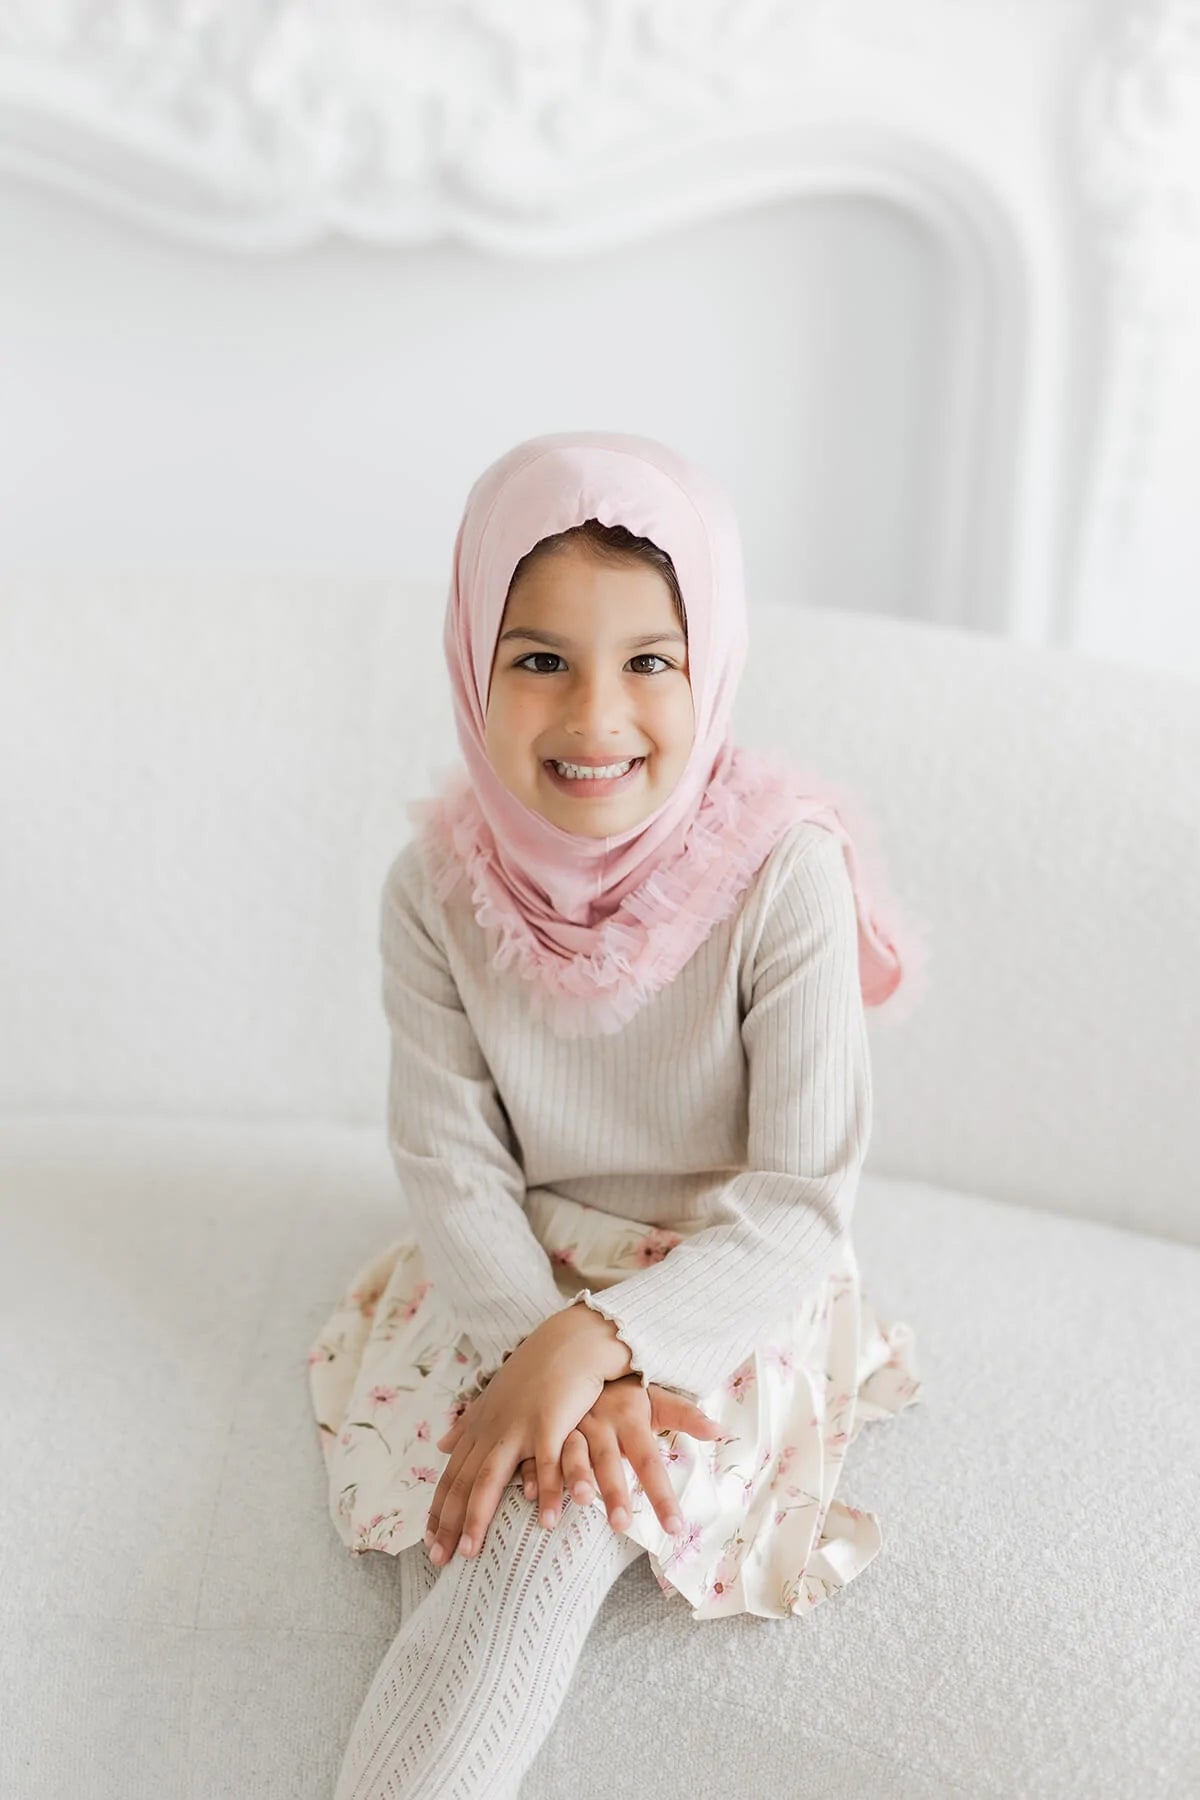 Buy Maknas hijabs for Muslim women in the USA. We are selling the best quality hijabs for women in the United States. You can buy premium quality hijab dresses in our online clothing store. 